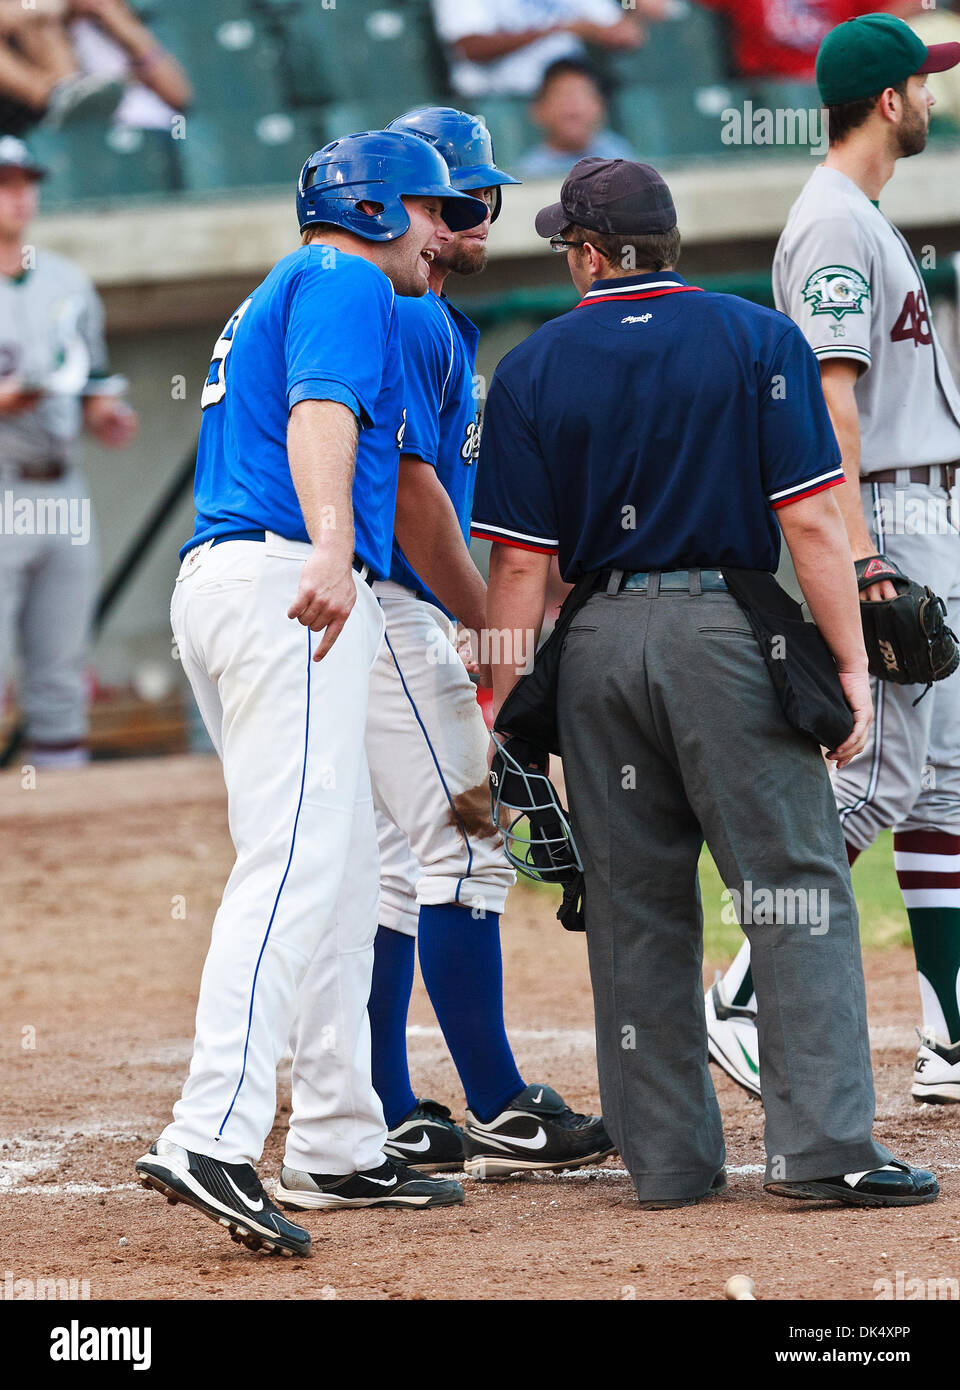 July 19, 2011 - Fort Worth, Texas, U.S - Fort Worth Cats Infielder Trent Lockwood (9) has a discussion with the home plate umpire, Shaylor Smith, during the American Association of Independant Professional Baseball game between the Gary Southshore Railcats and the Fort Worth Cats at the historic LaGrave Baseball Field in Fort Worth, Tx. Gary Southshore defeats Fort Worth 7 to 3. (C Stock Photo